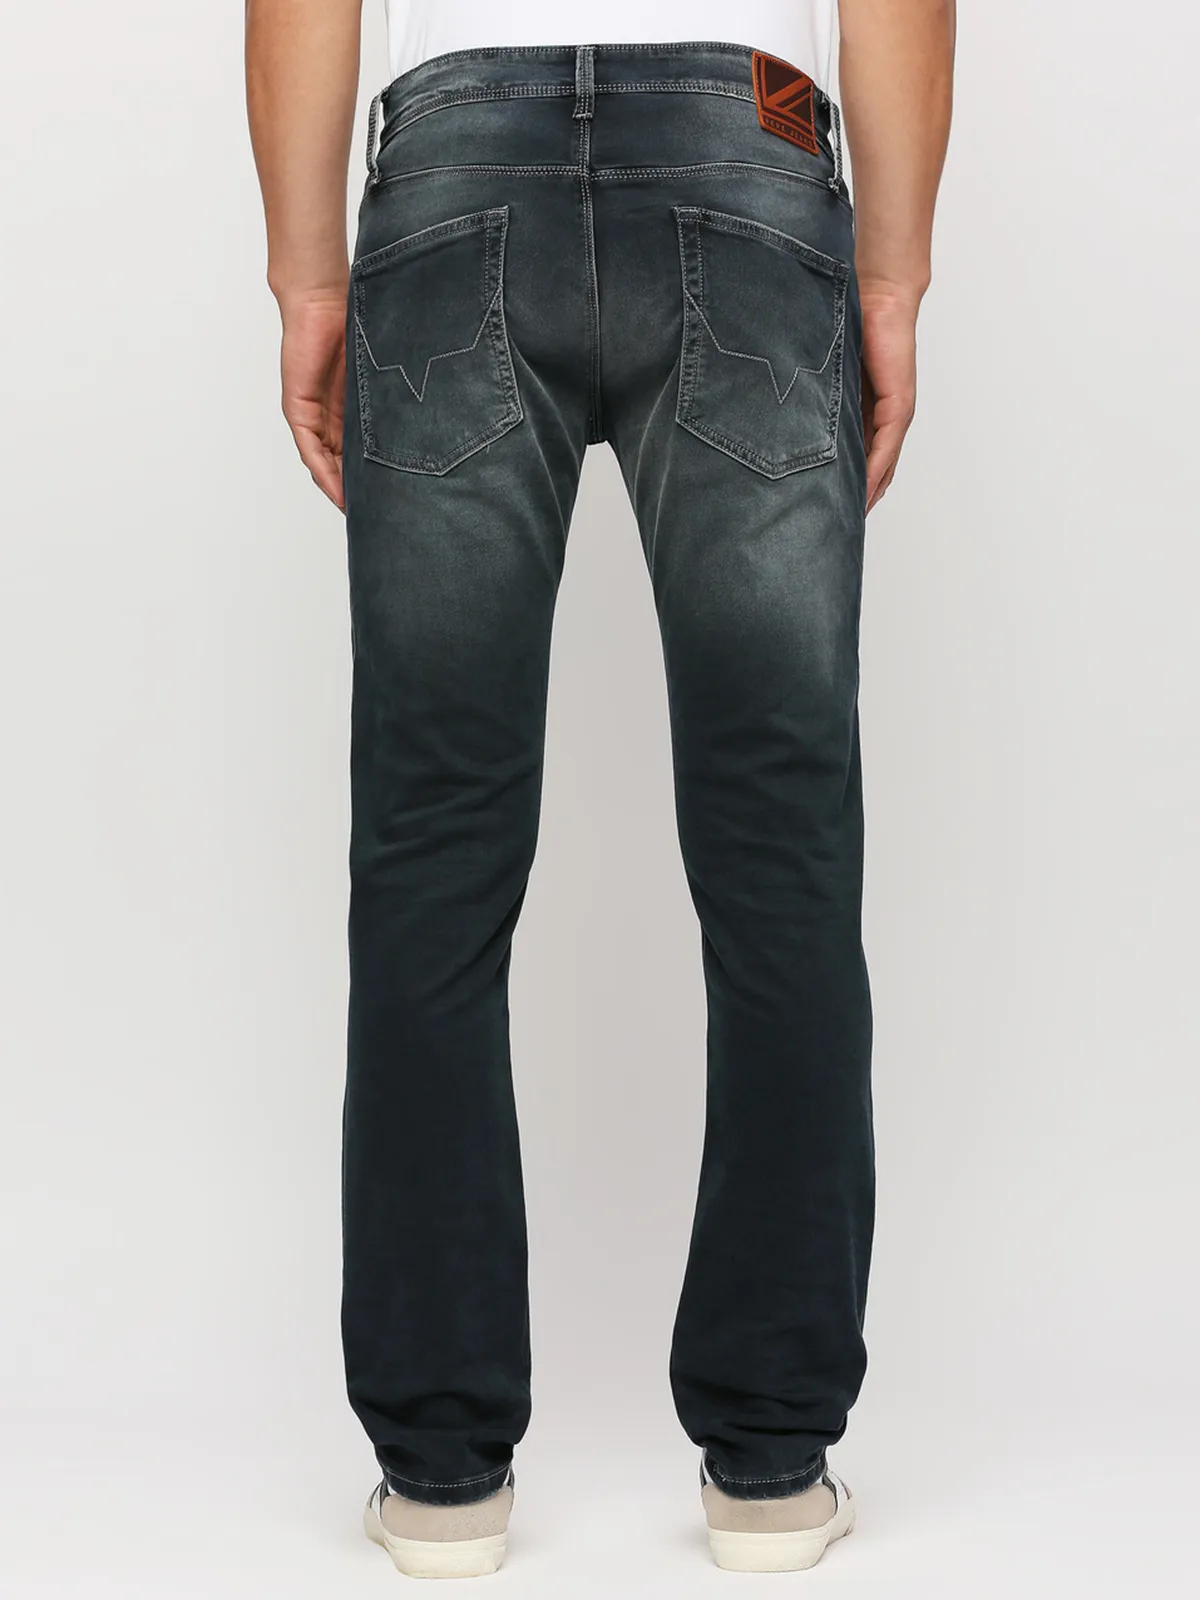 Pepe Jeans black washed jeans with slim fit